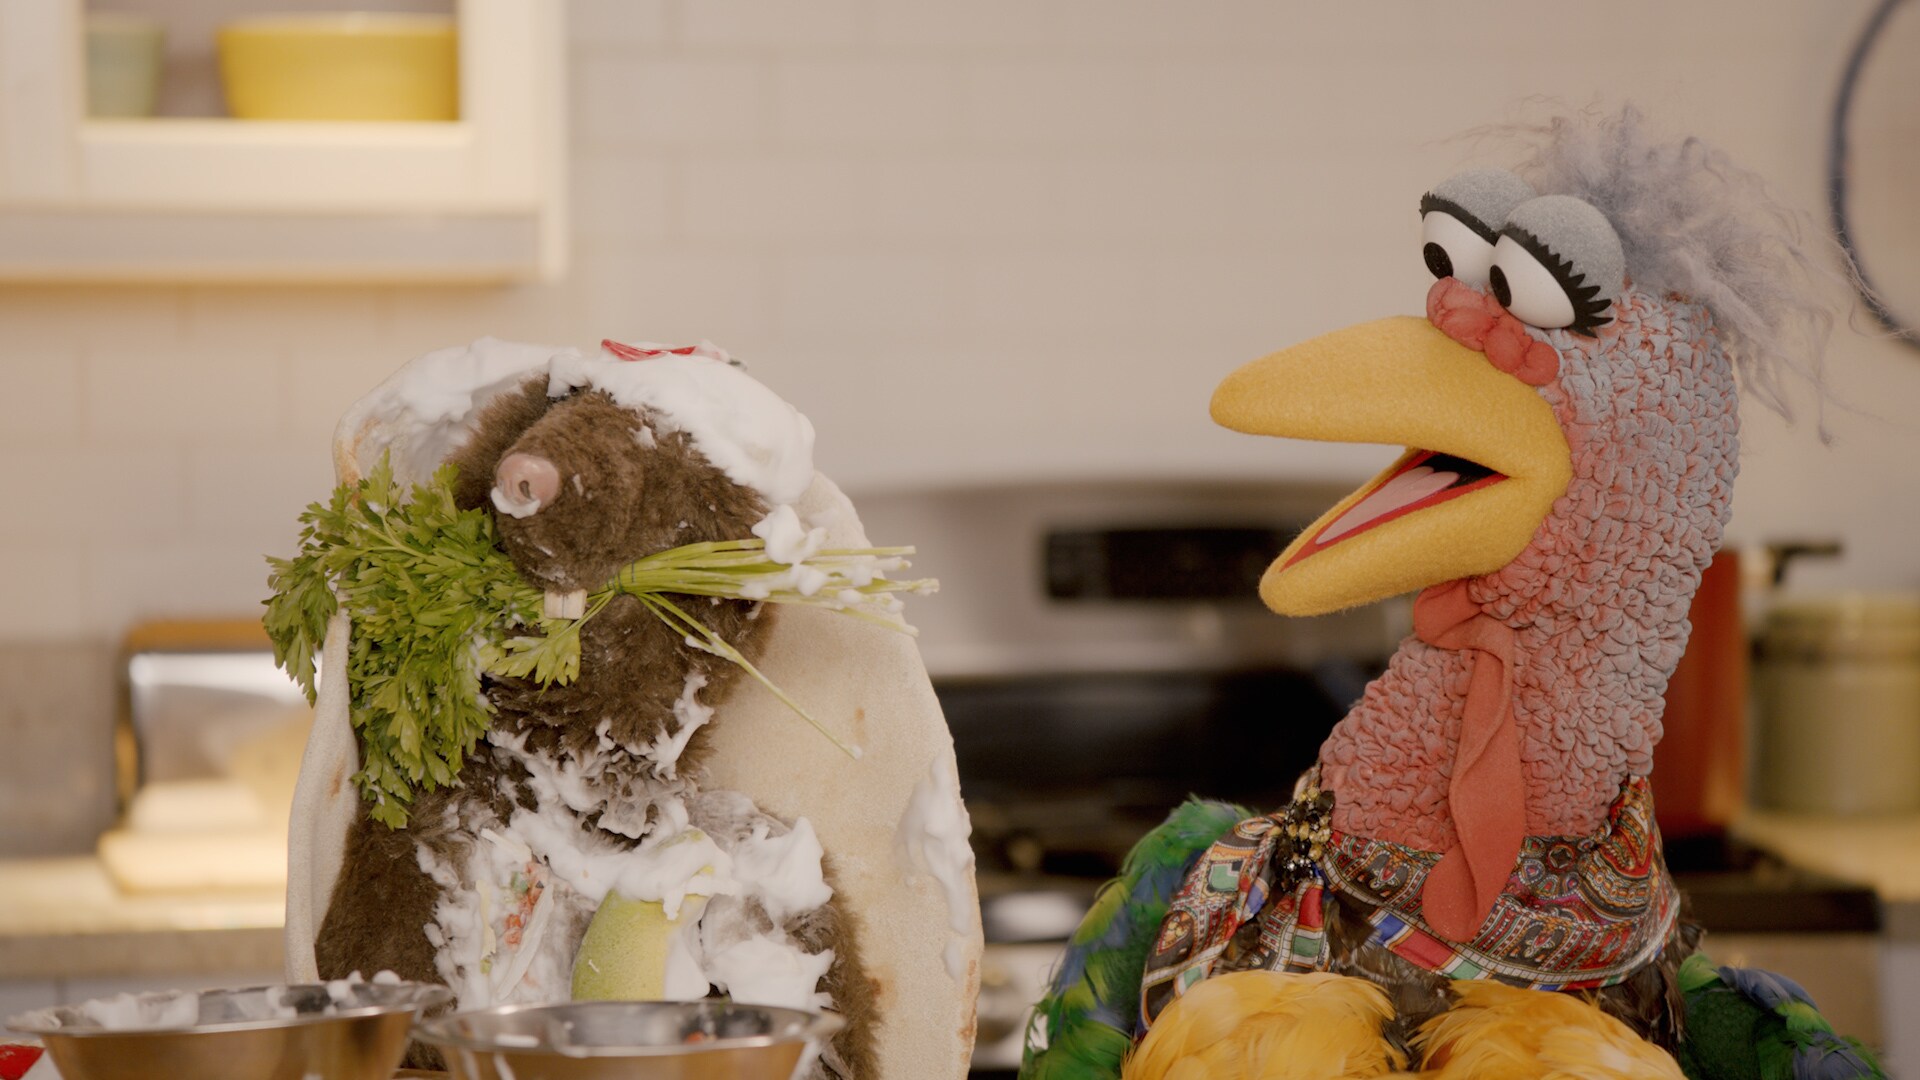 Beverly Plume in “Muppets Now,” streaming only on Disney+